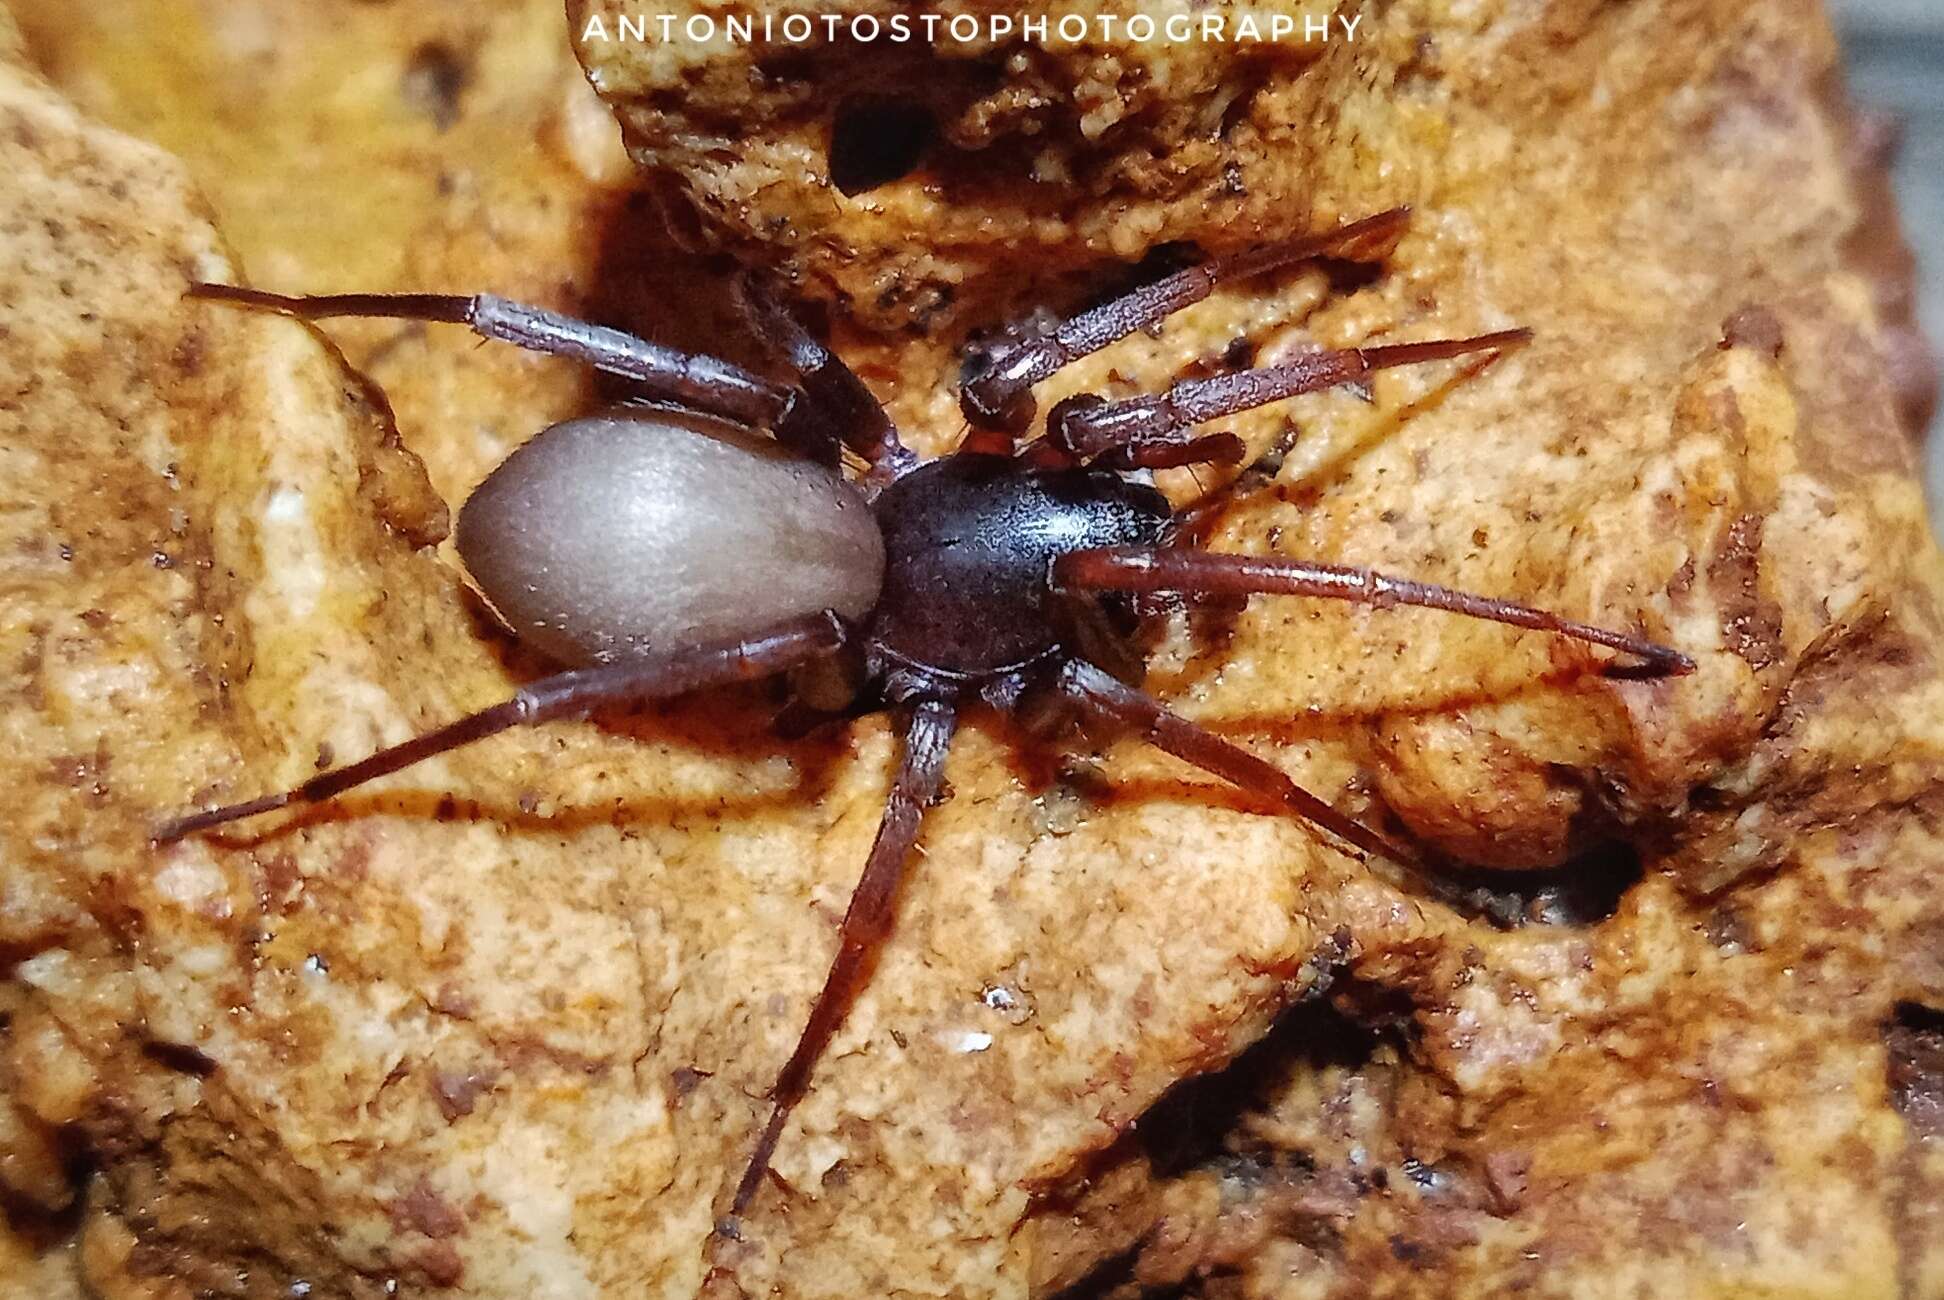 Image of Antmimic spider